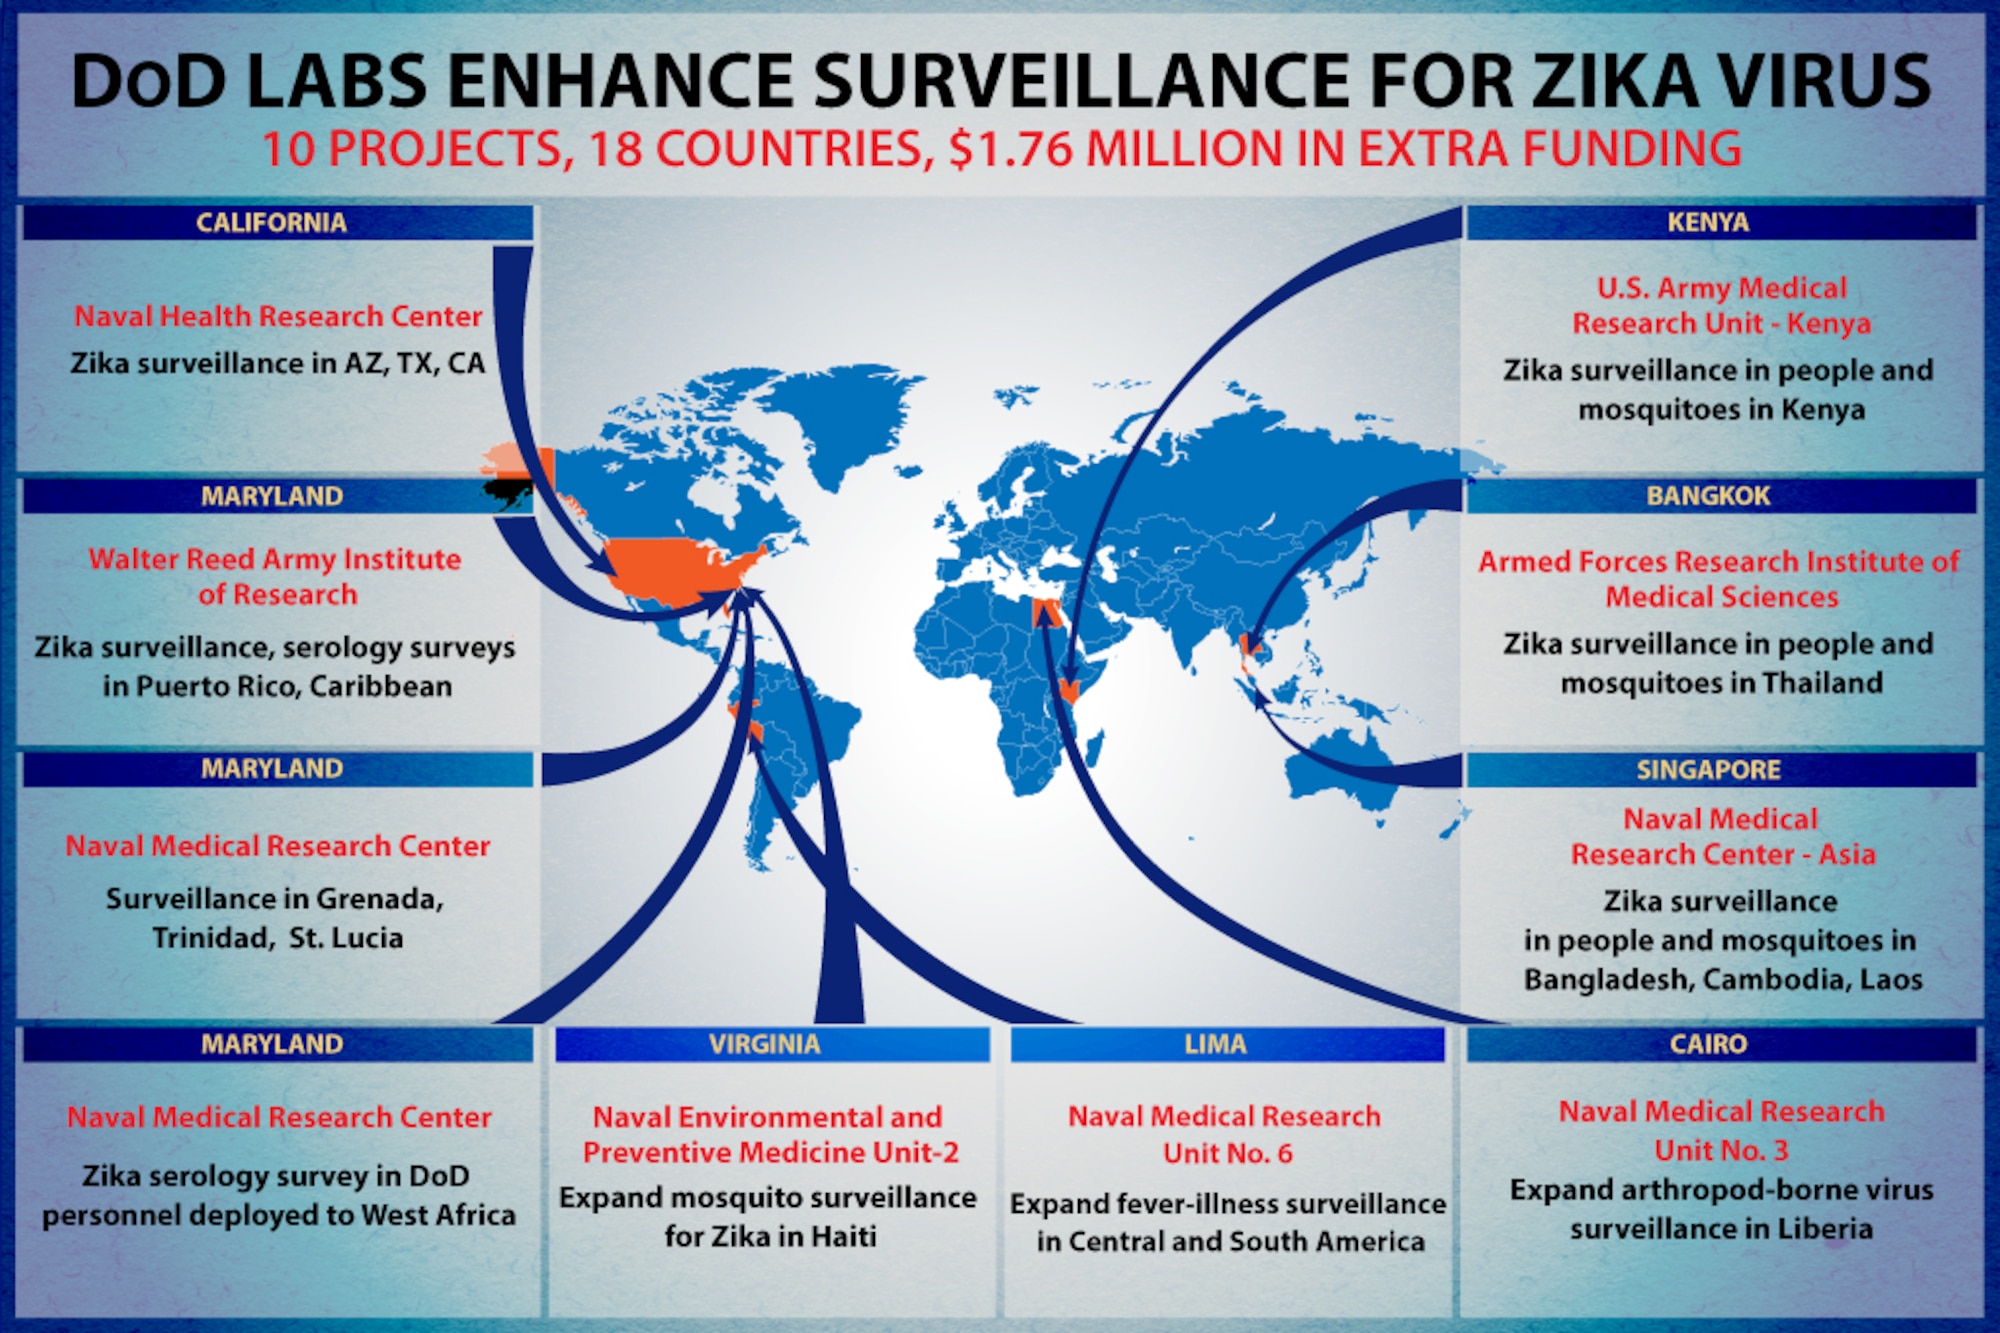 The Defense Department is providing $1.76 million in extra funding to military laboratories to expand Zika virus surveillance worldwide and assess the virus’s impact on deployed service members’ health and readiness. DoD graphic by Regina Ali